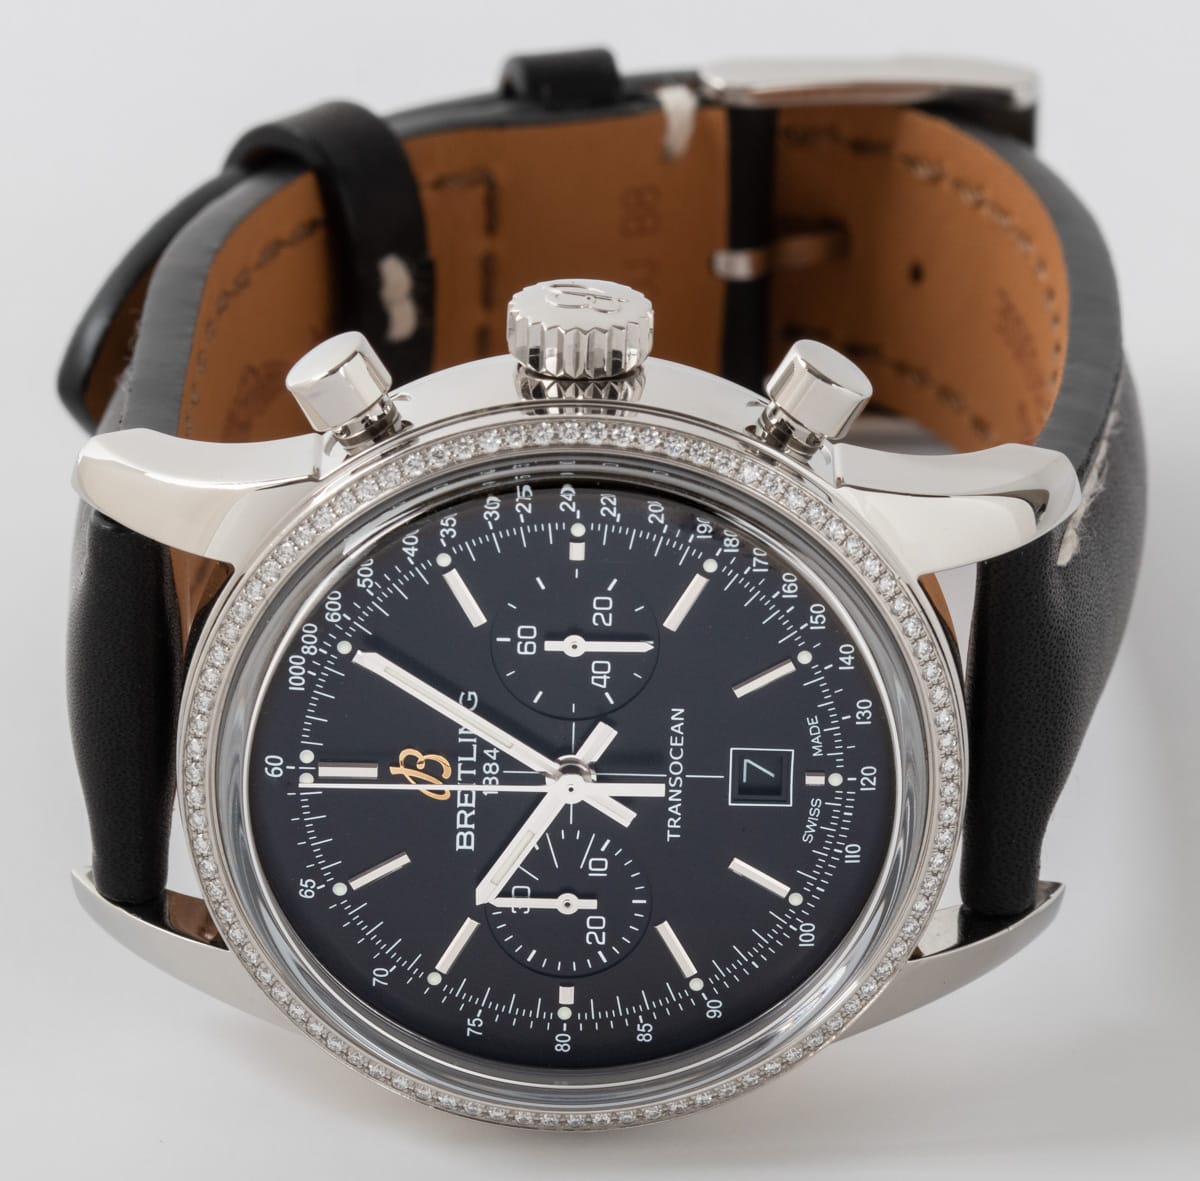 Front View of TransOcean Chrono 38